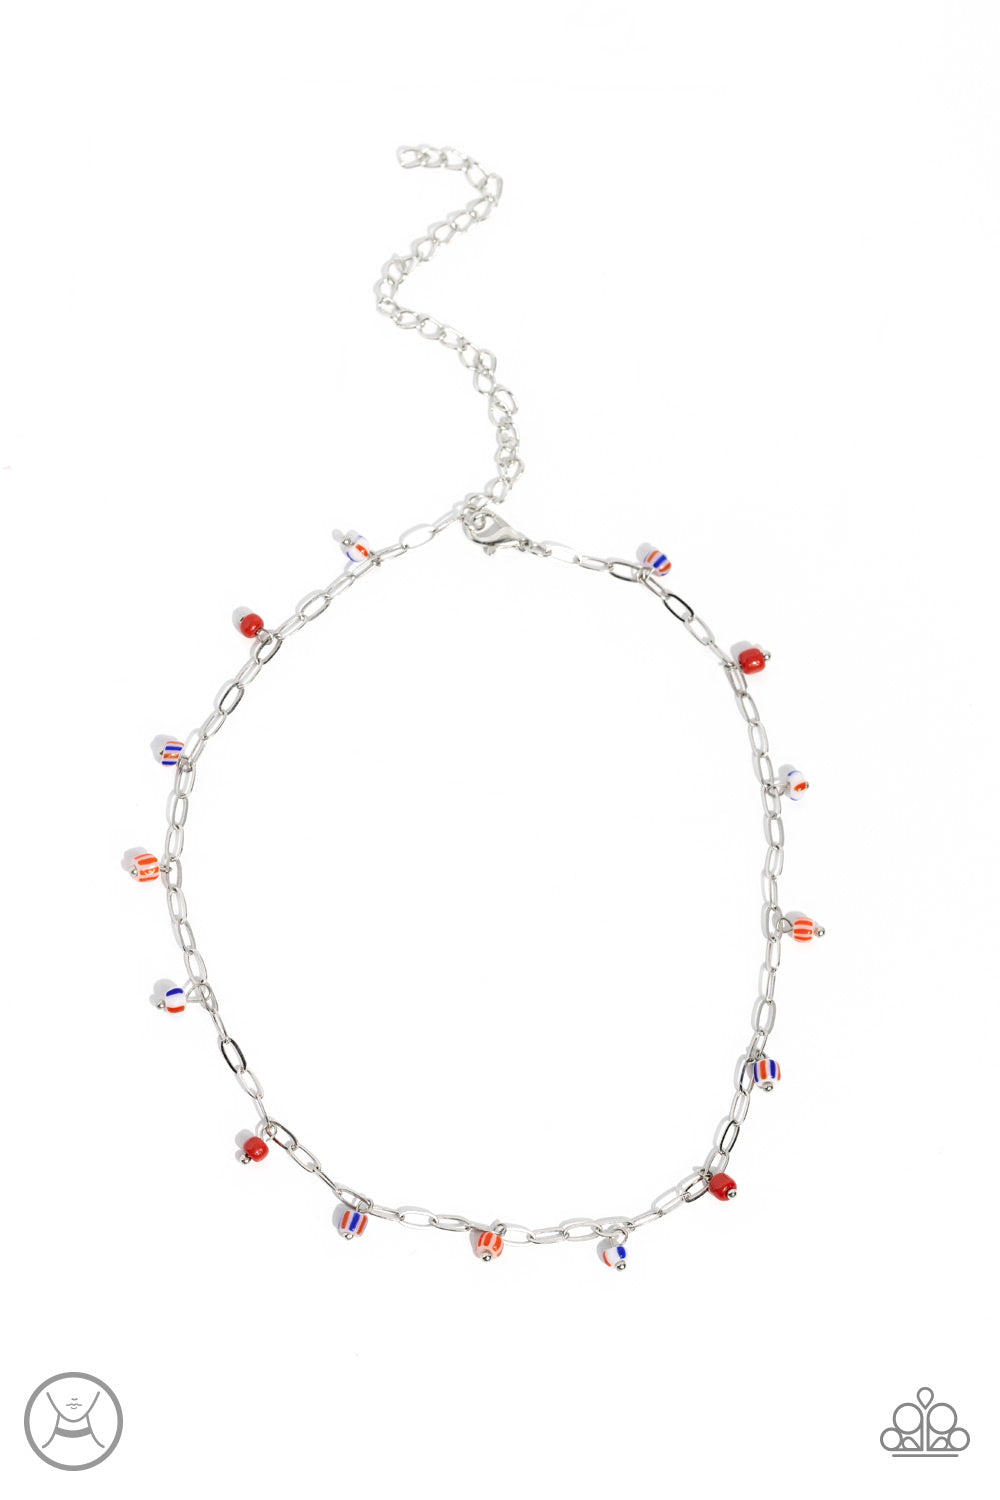 Beach Ball Bliss Red Choker Necklace - Paparazzi Accessories  Featuring multicolored spots, bright red seed beads dangle along a single dainty silver link chain for a beachy flair. Features an adjustable clasp closure.  Featured inside The Preview at Made for More!  Sold as one individual choker necklace. Includes one pair of matching earrings.  P2CH-RDXX-024XX